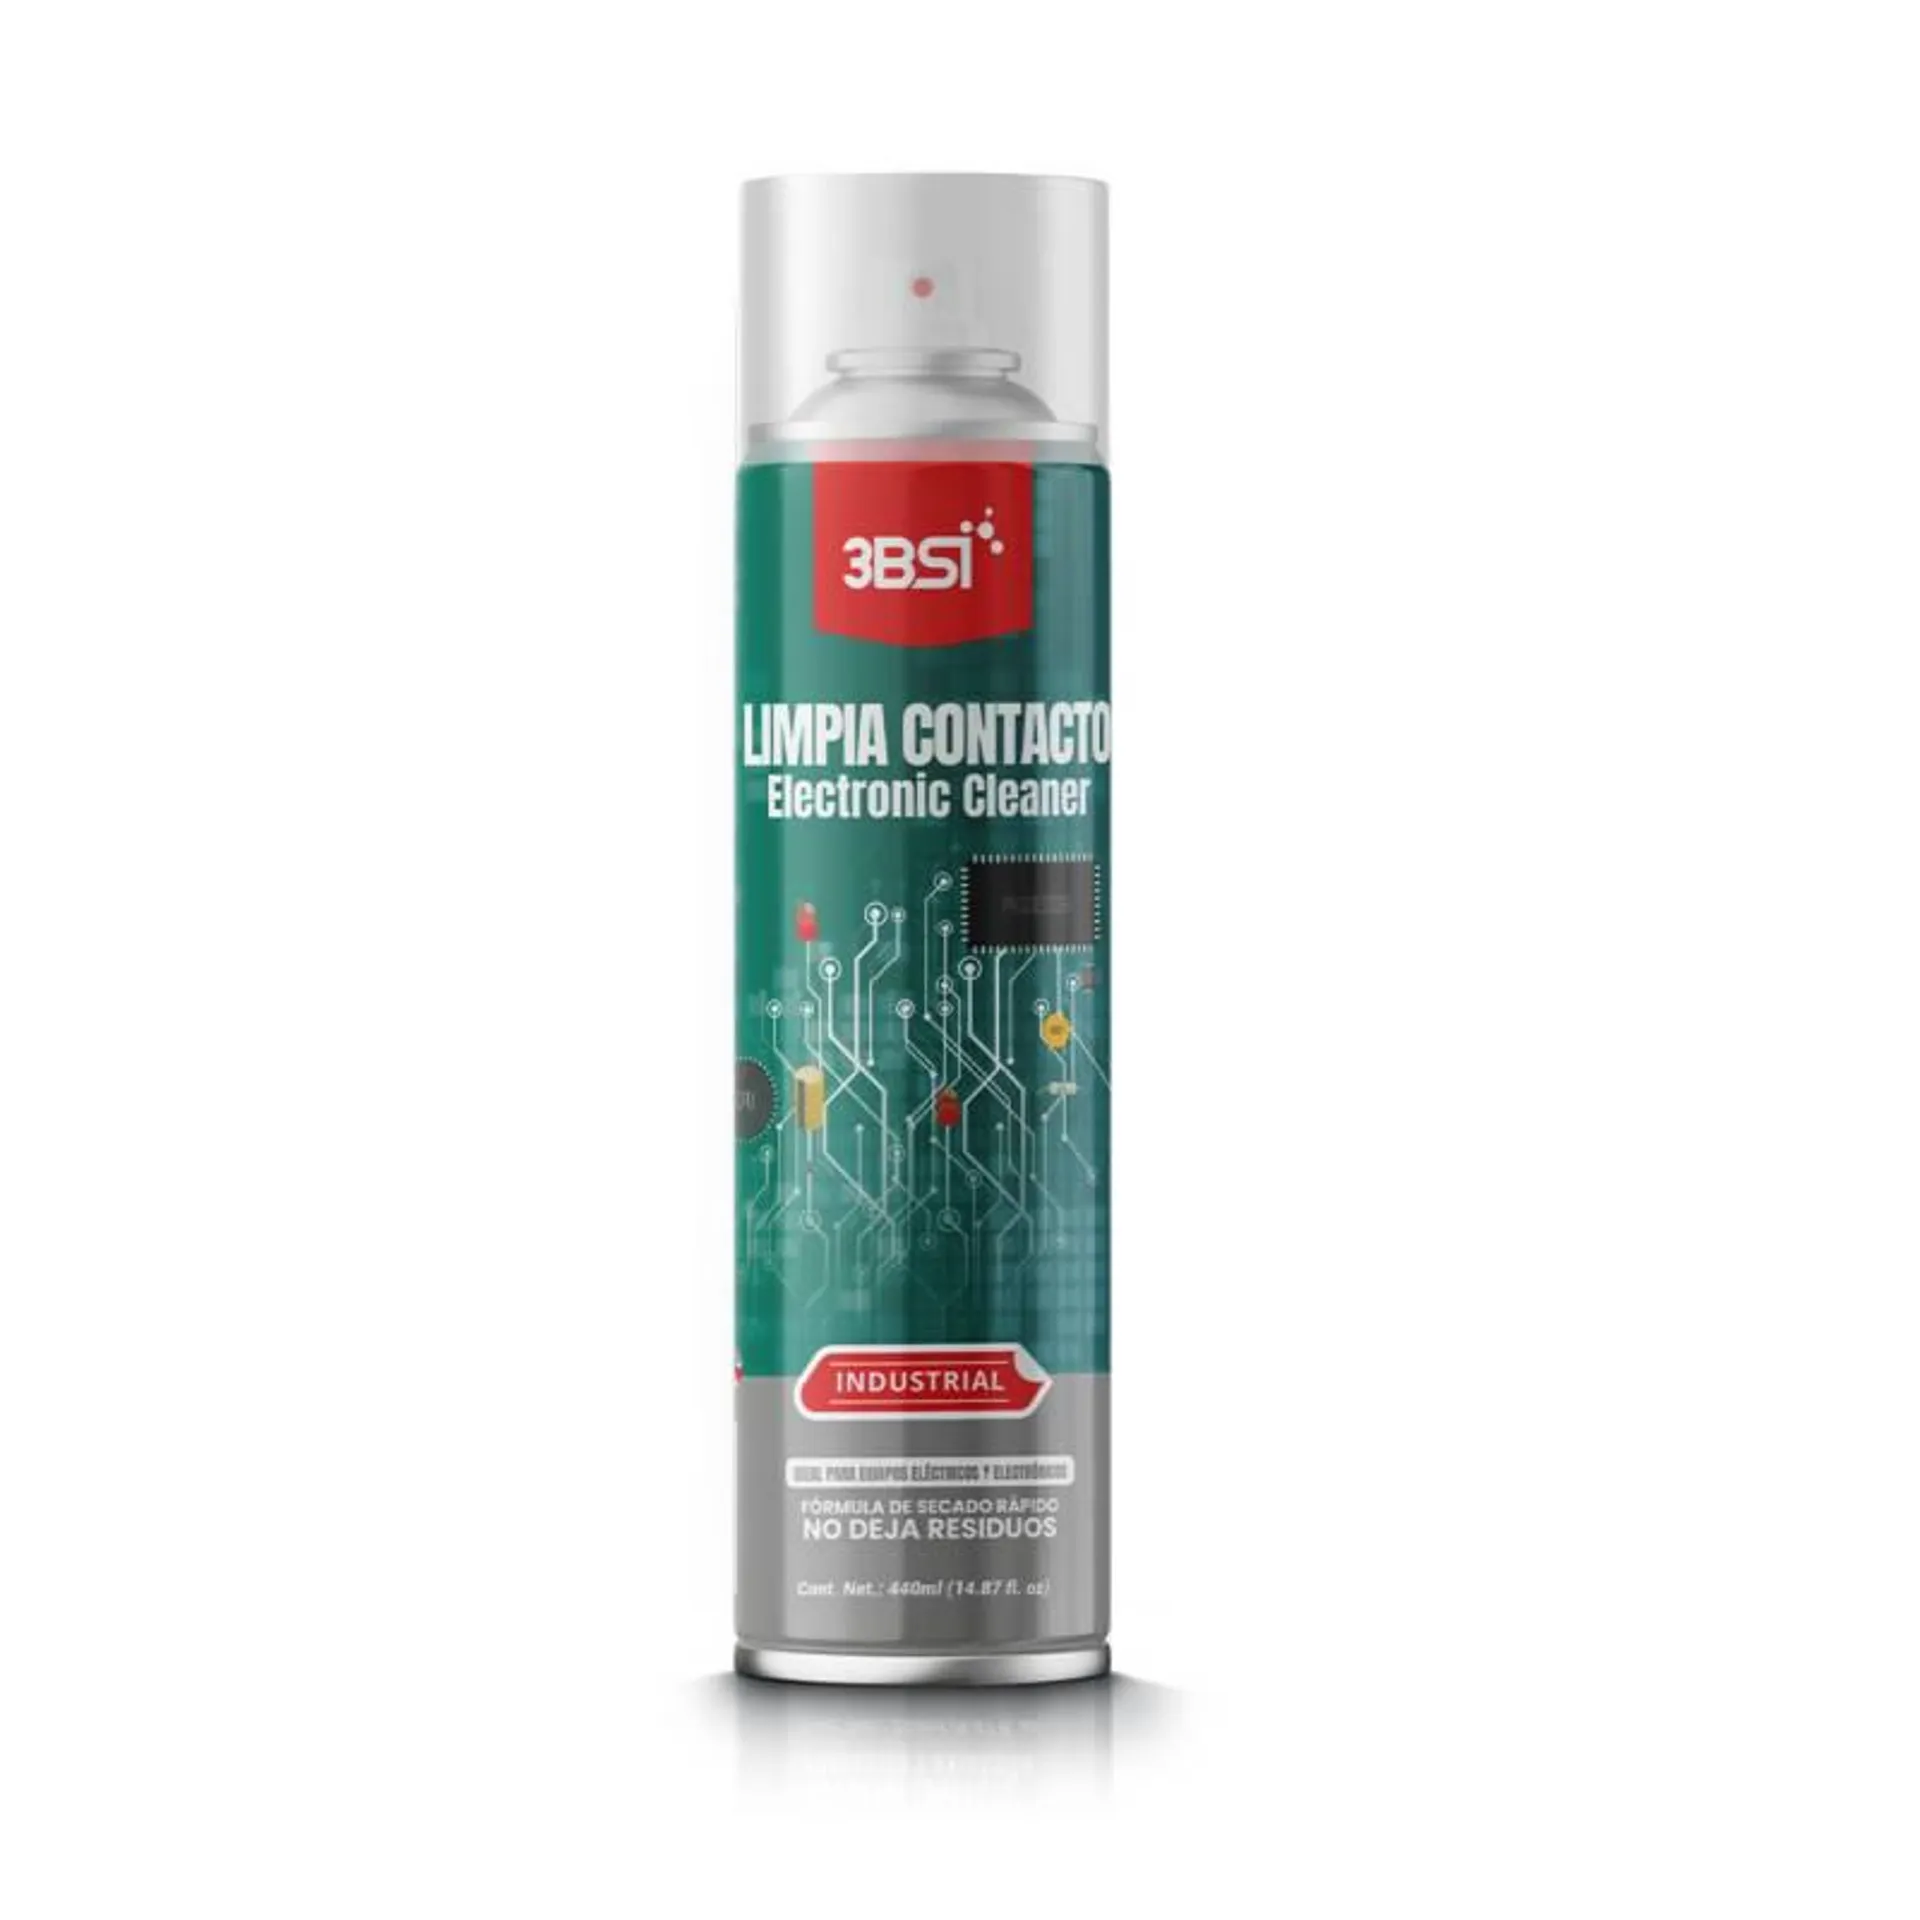 Limpiacontactos Electronic 3bsi Cleaner Spray 440 Ml